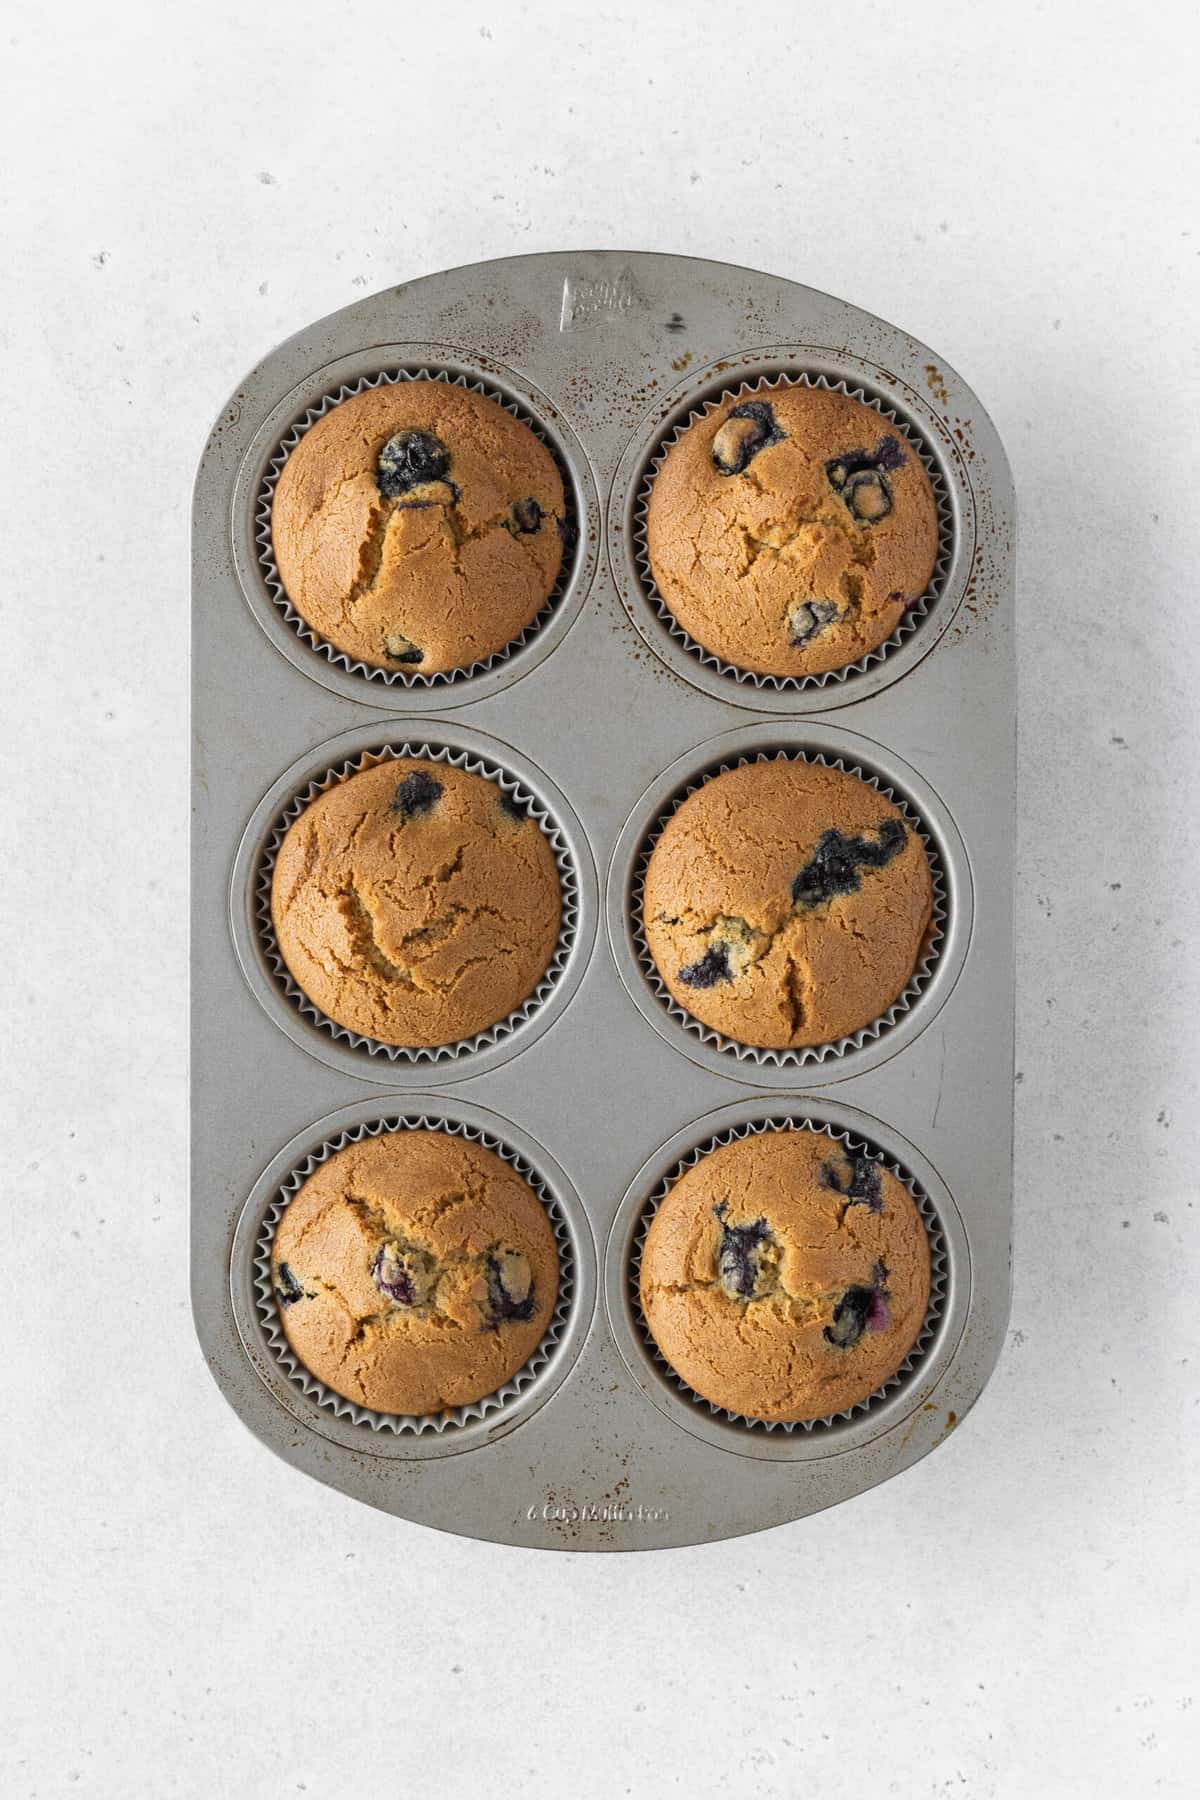 A muffin tray of dairy-free blueberry muffins.